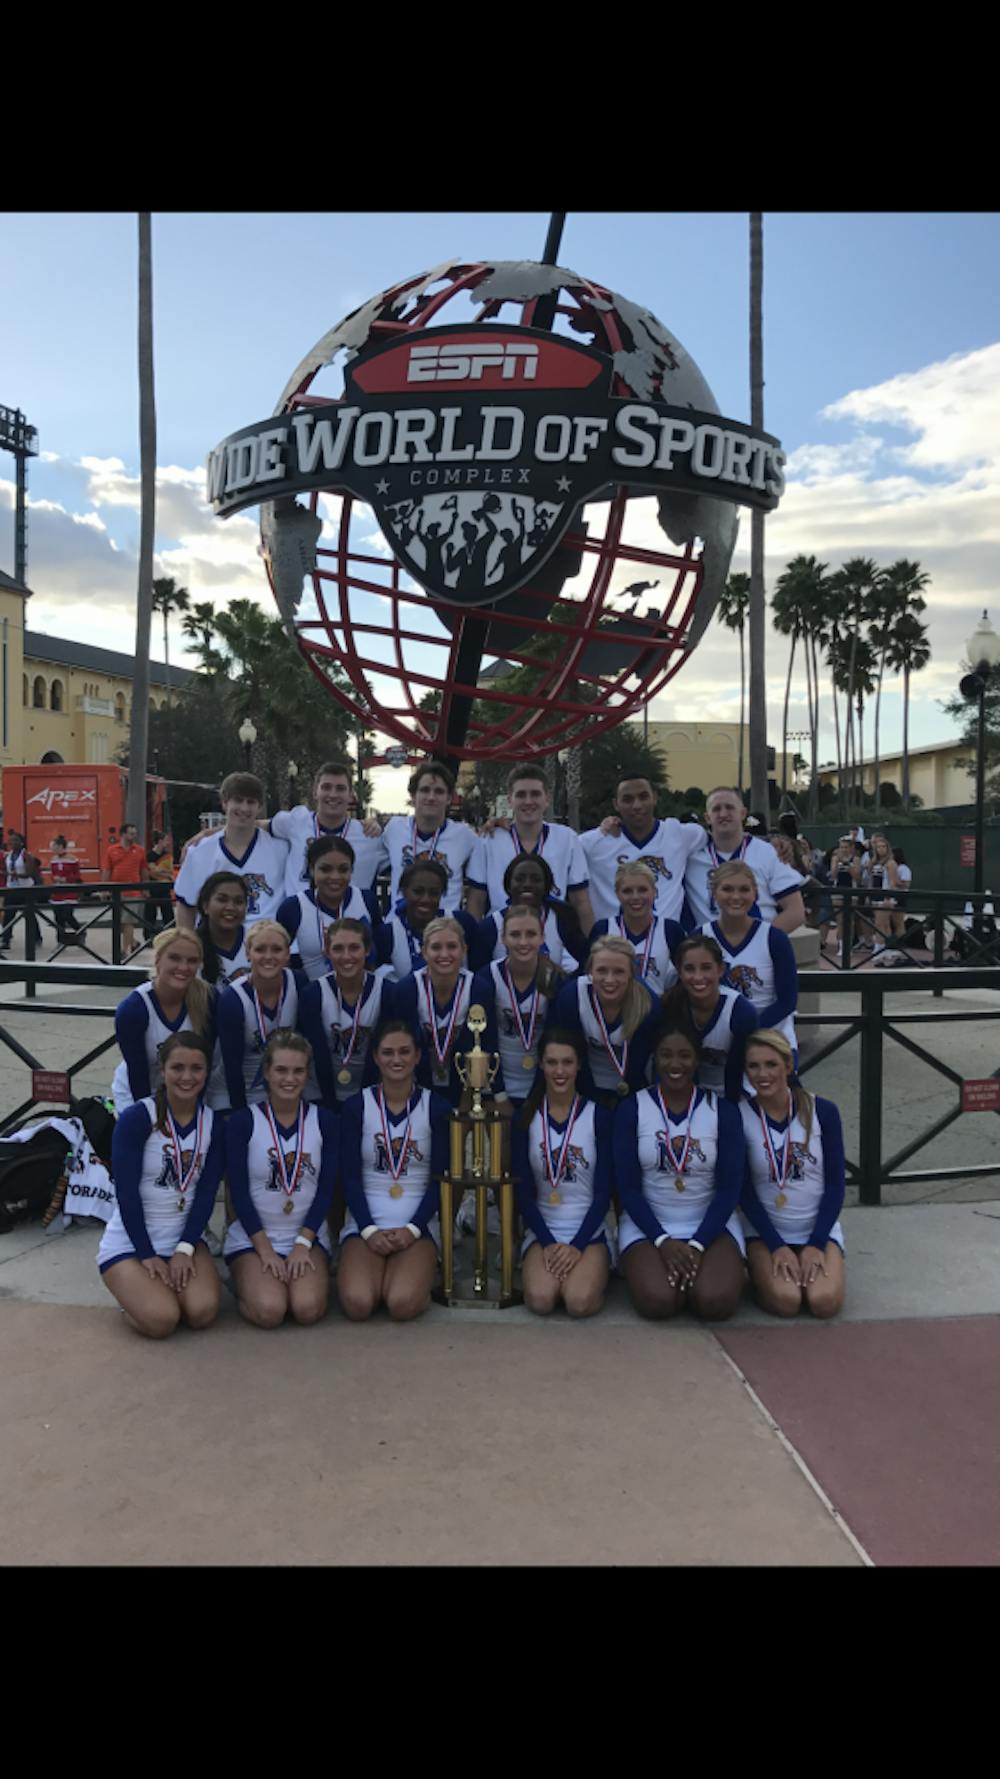 <p>The cheer team poses with their trophy and medal at the ESPN complex in Orlando, Florida. This win marks their fifth national championship win.</p>